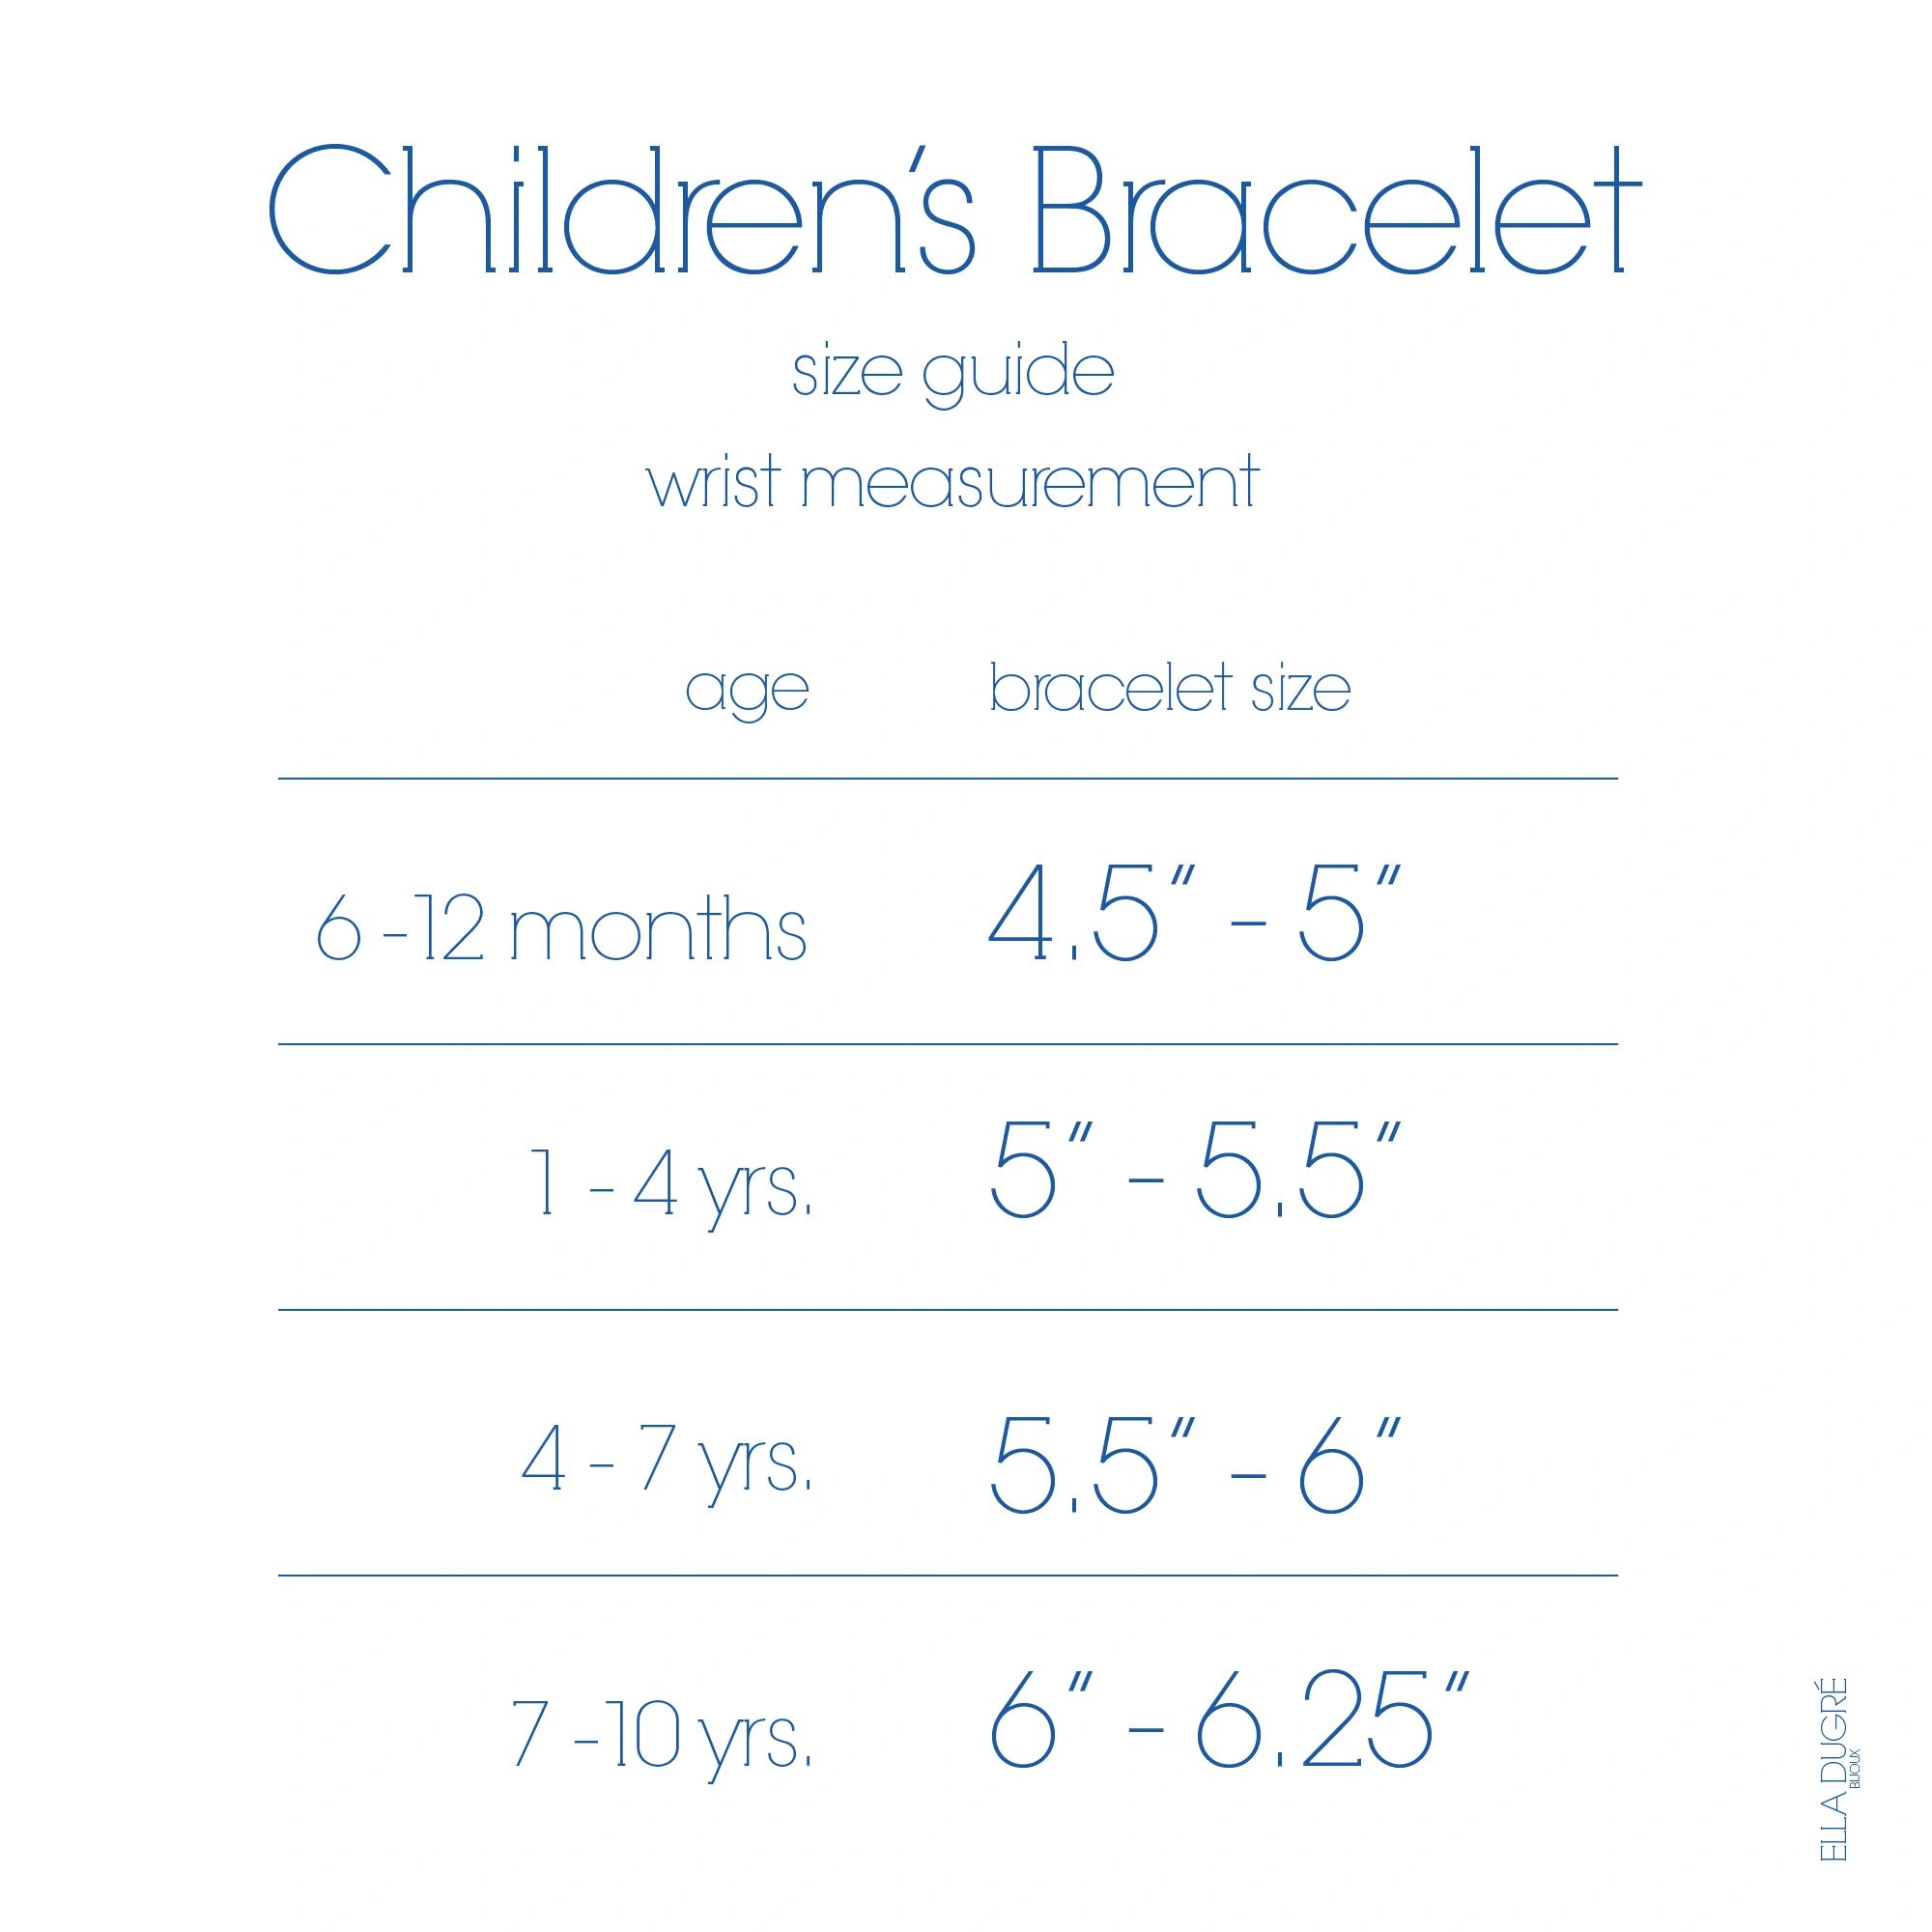 Children's Bracelet size chart between ages 6months to 10 years old